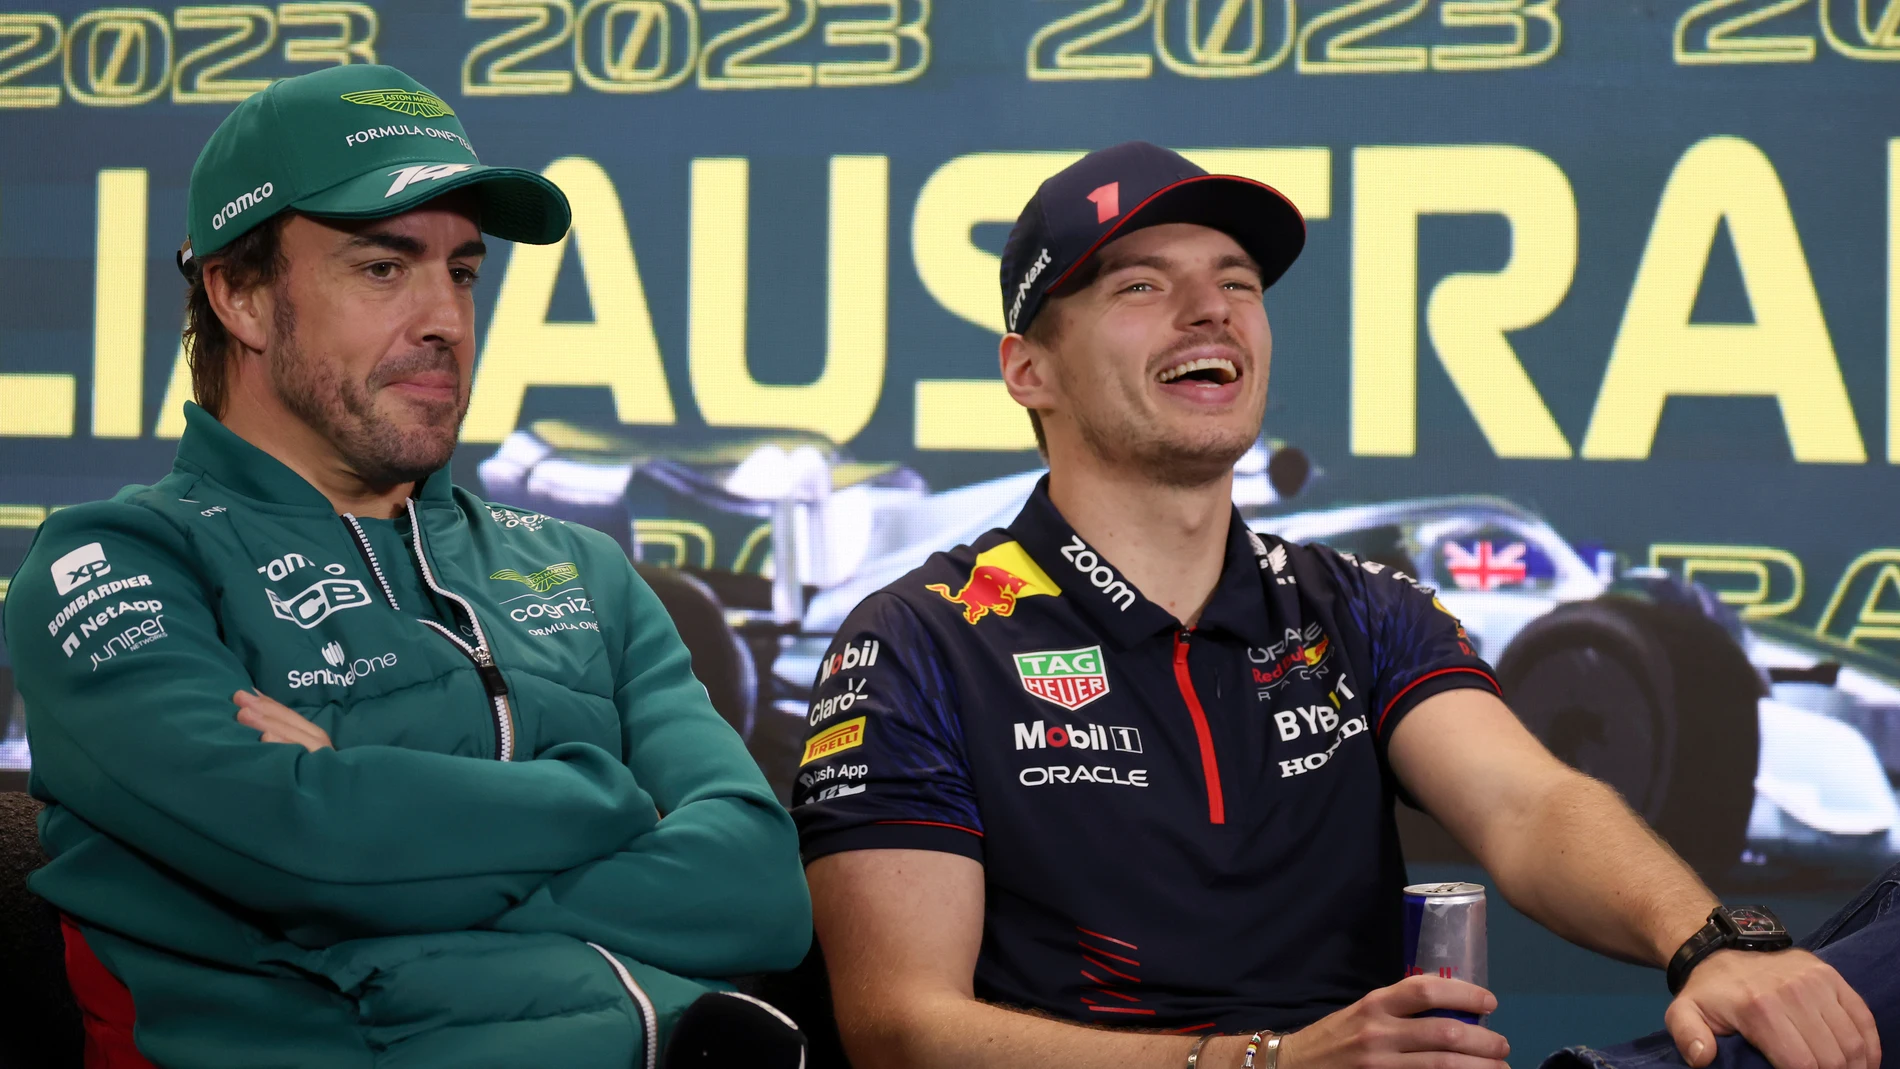 Aston Martin driver Fernando Alonso of Spain, left, and Red Bull driver Max Verstappen of Netherlands chat during a press conference ahead of the Australian Formula One Grand Prix at Albert Park in Melbourne, Thursday, March 30, 2023. (AP Photo/Asanka Brendon Ratnayake)